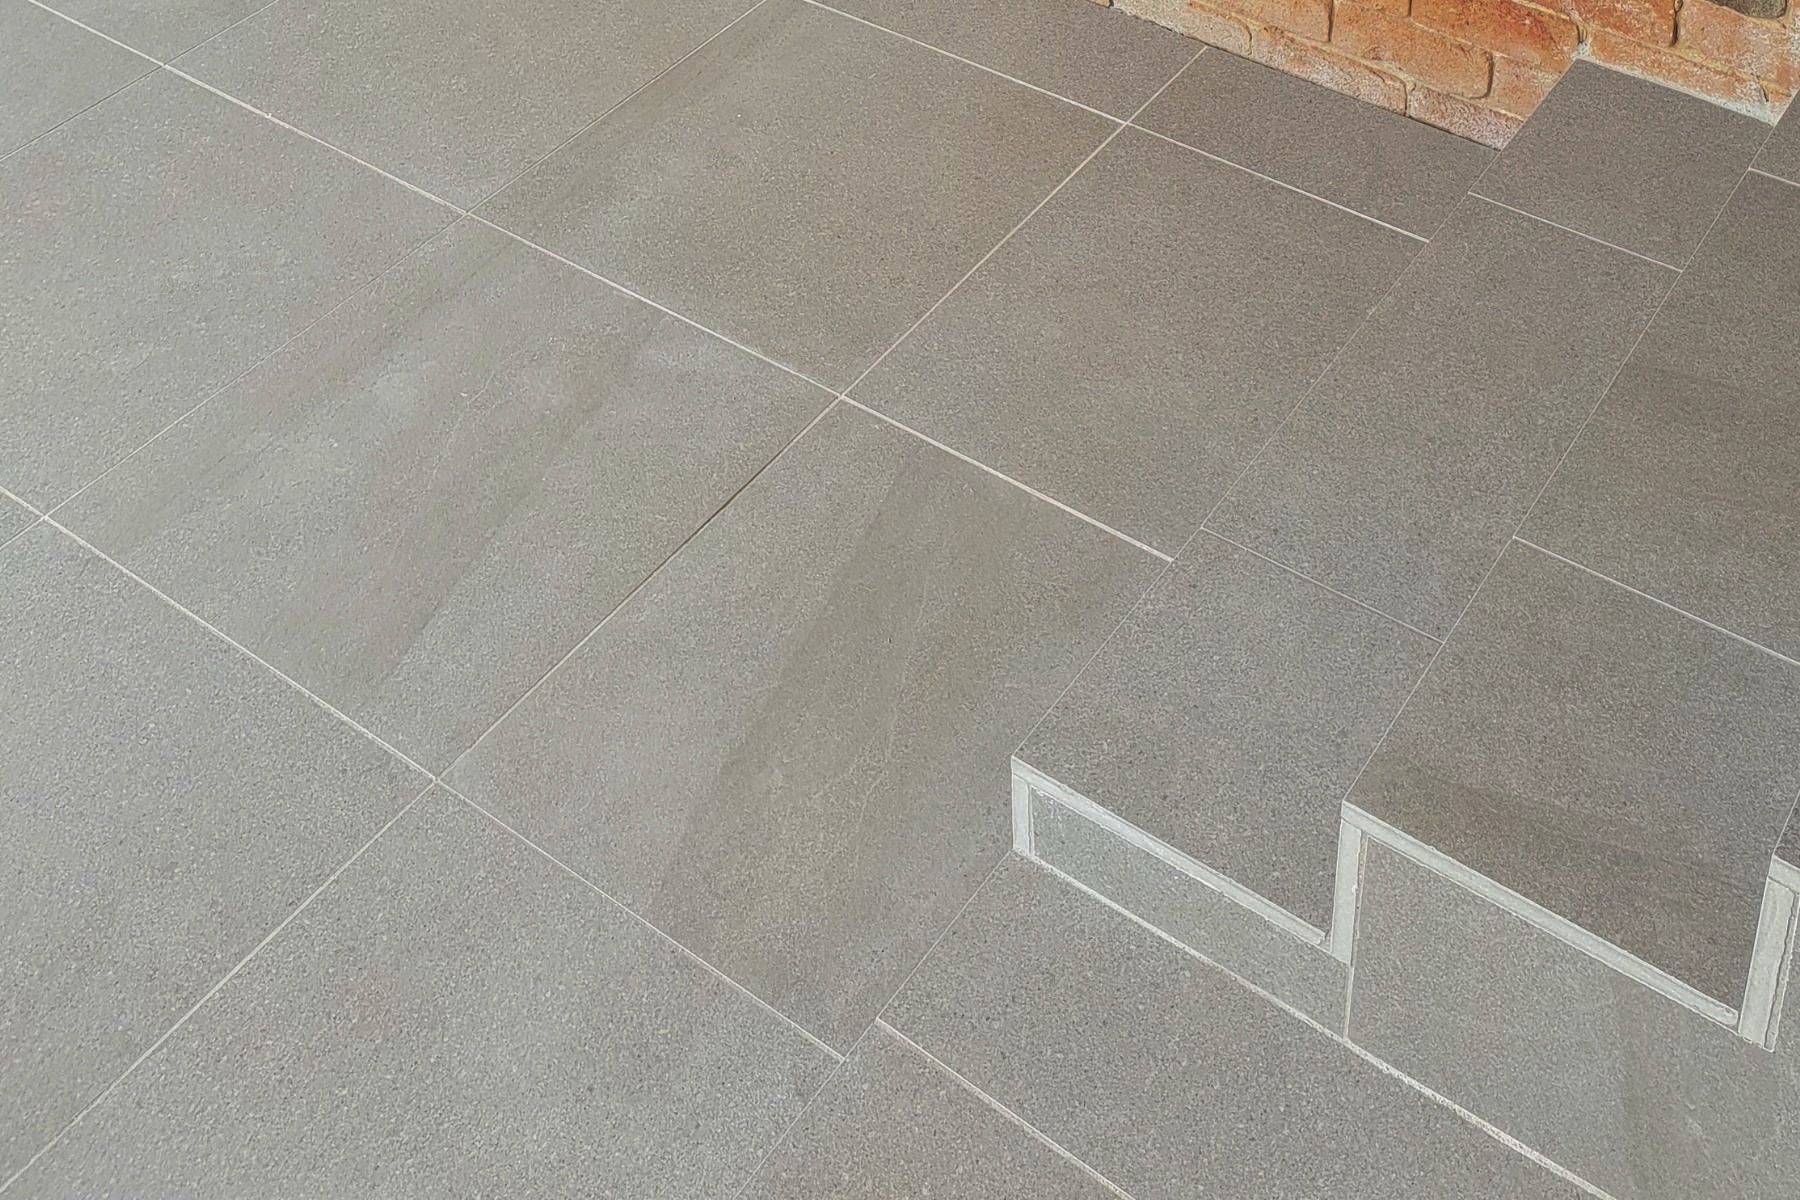 grey porcelain pavers used as step pavers with landing looking like natural stone tiles